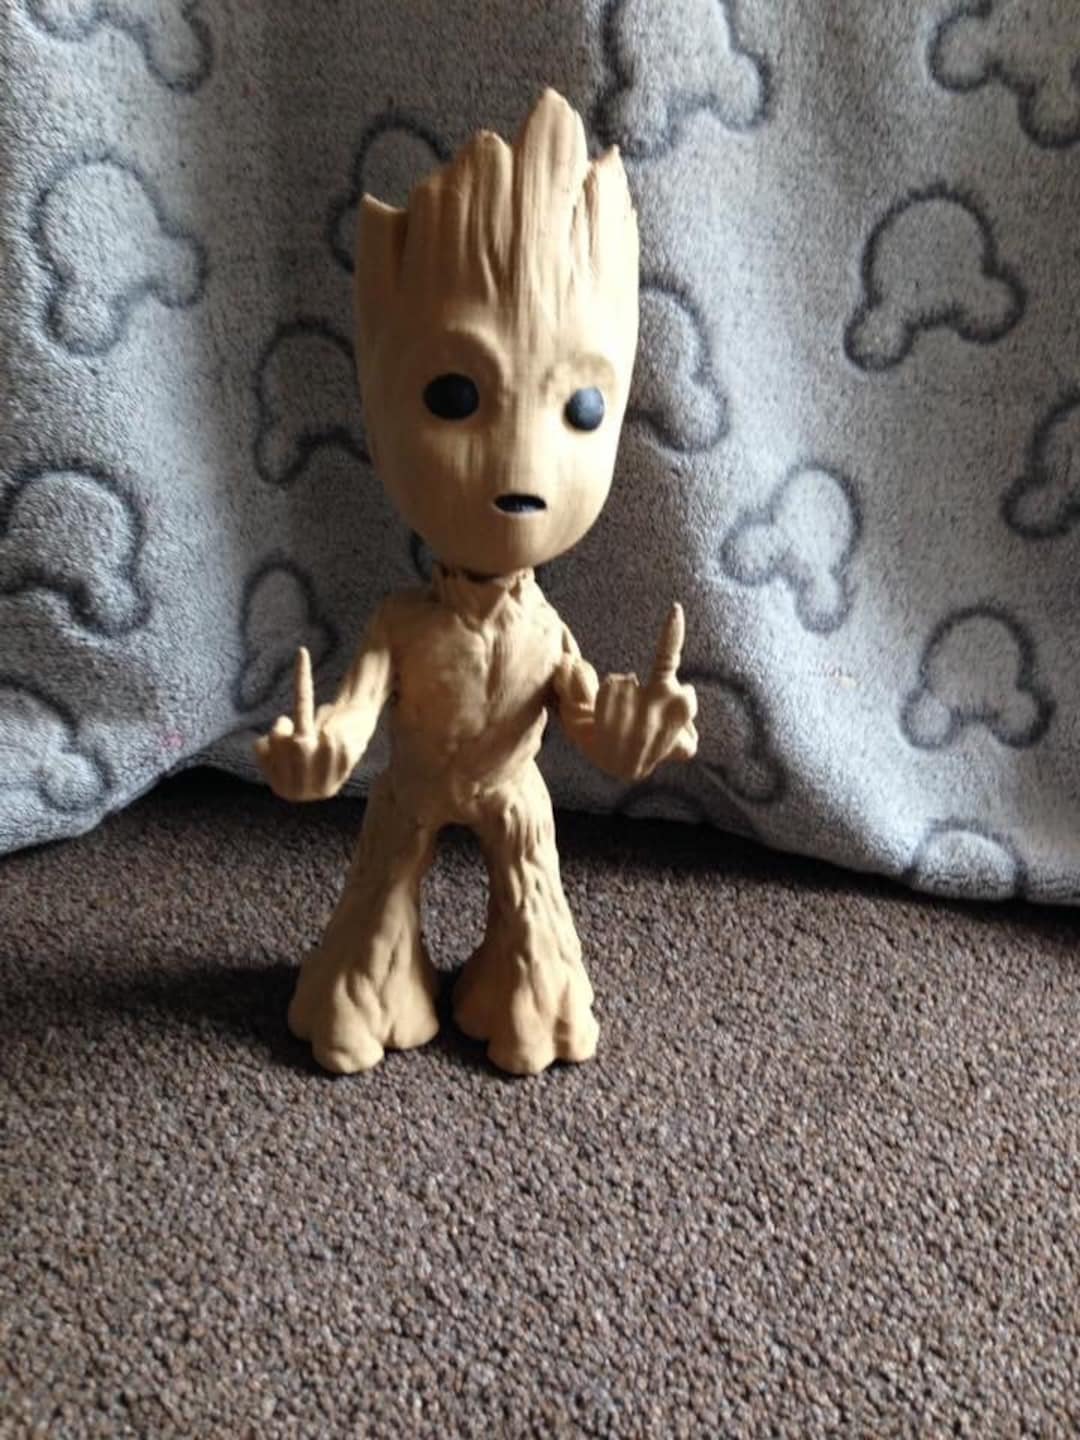 Angry Baby Groot Figure - Guardians of the Galaxy